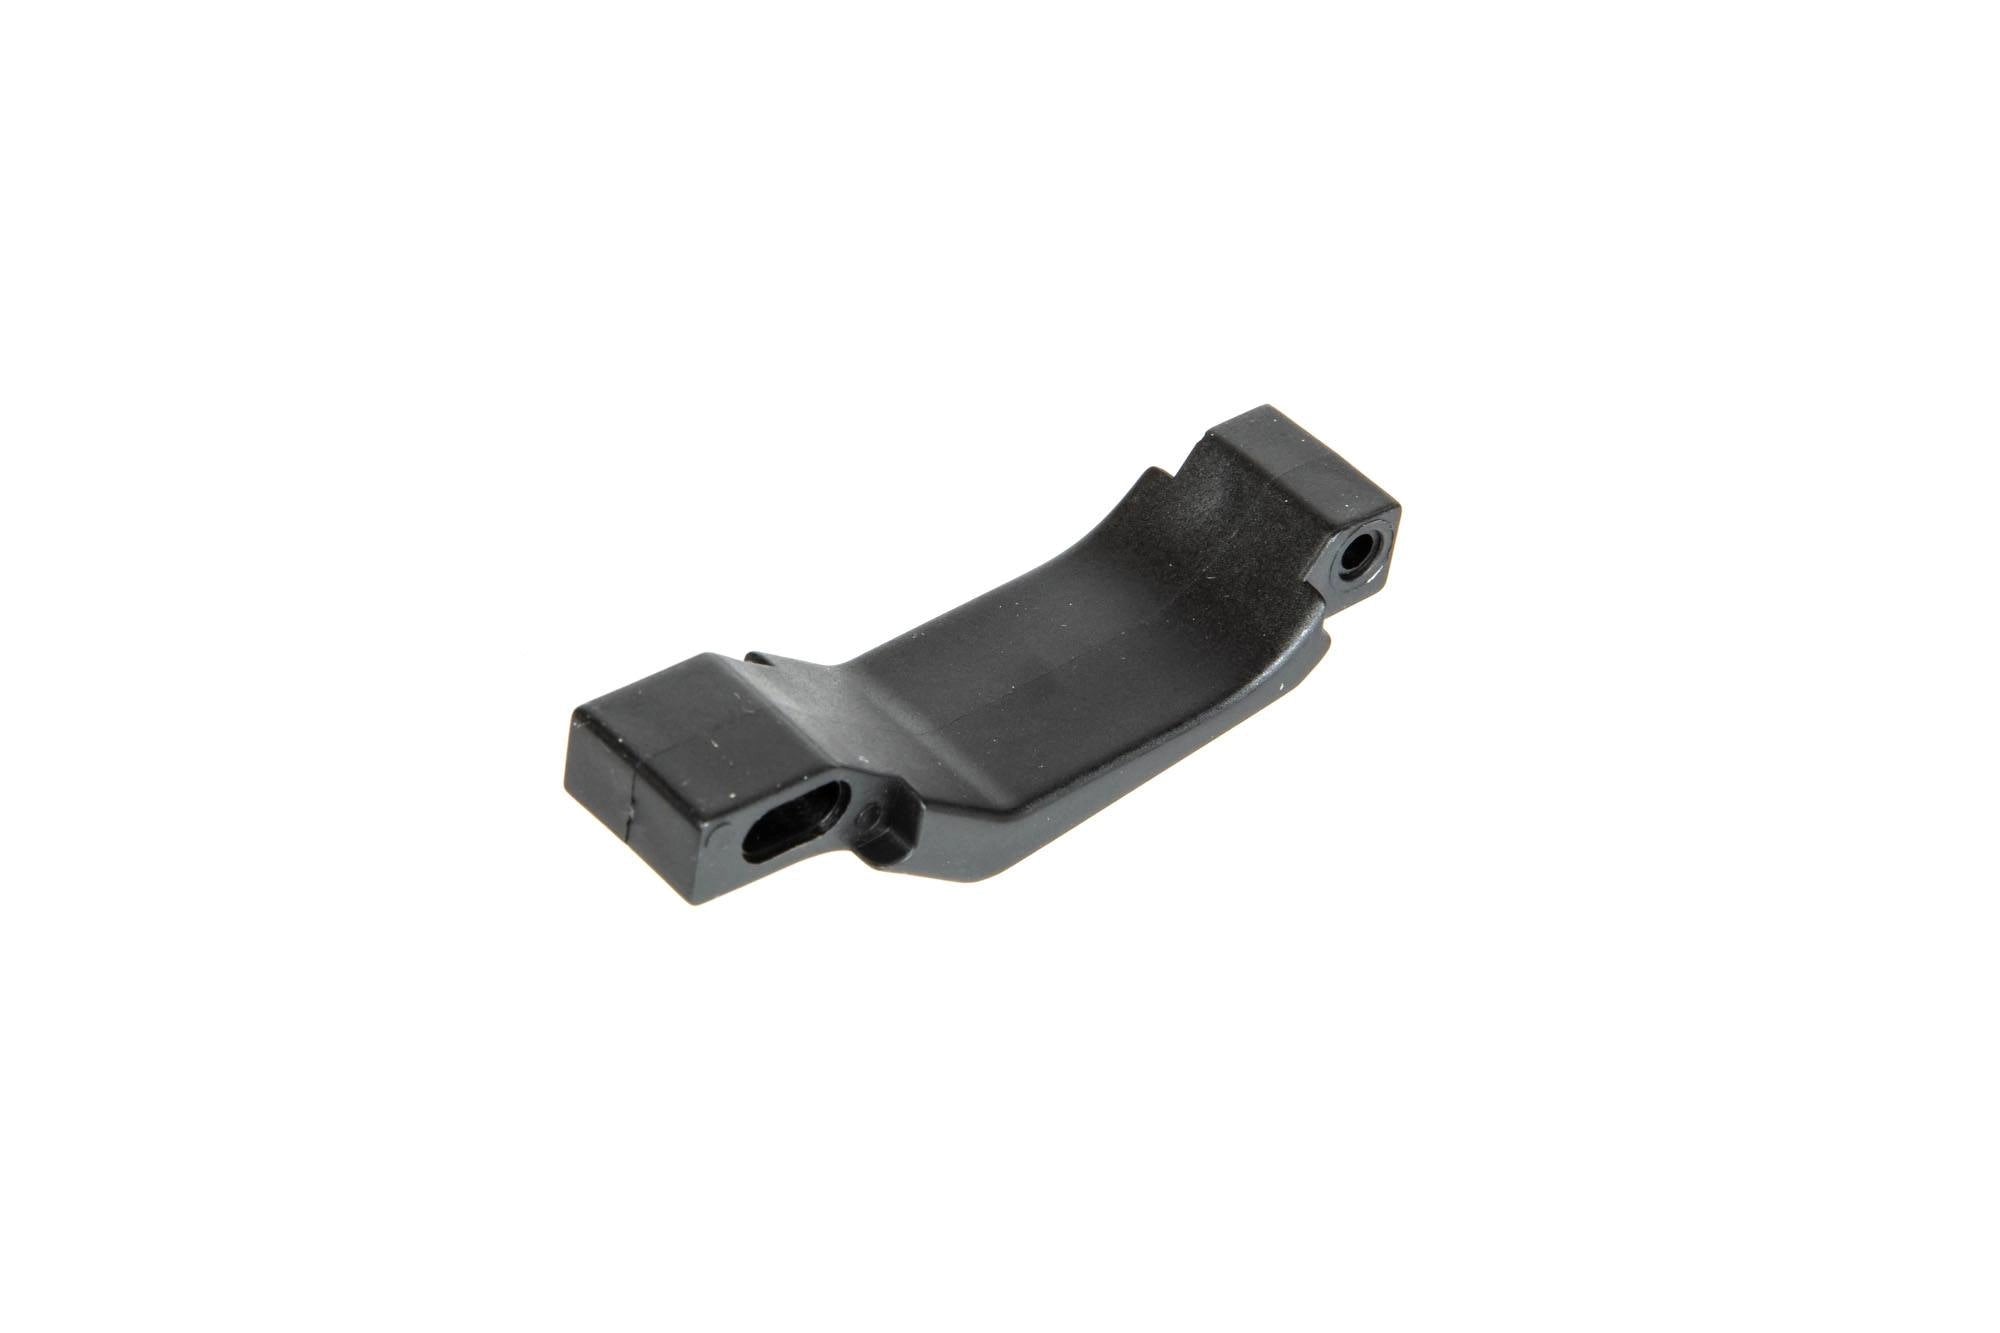 EP Trigger Guard for M4/M16 airsoft rifles - black-1